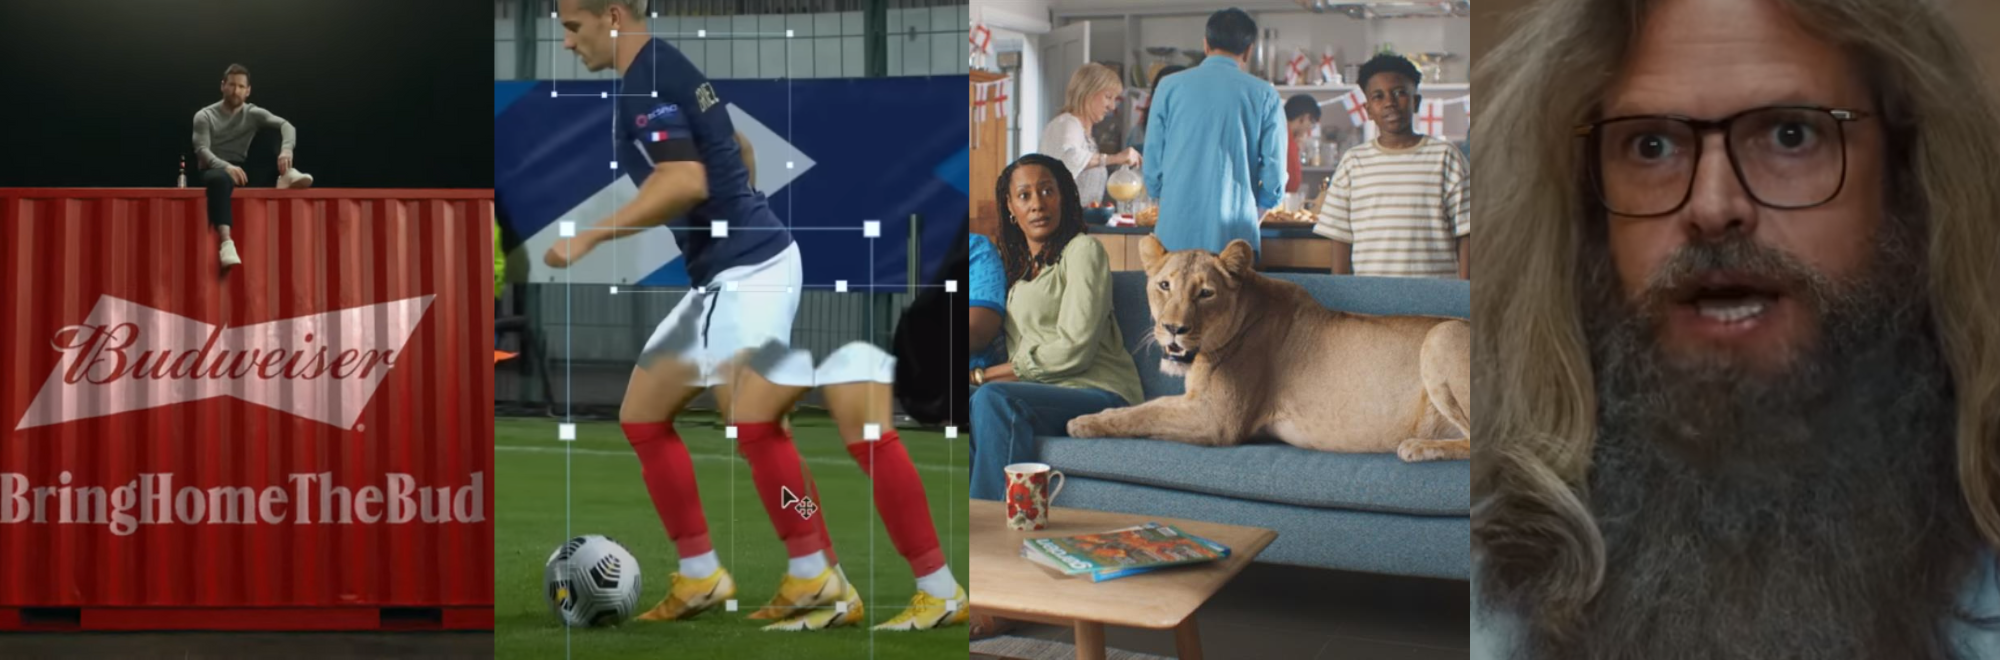 The Women’s 2023 World Cup ads are making moves, but in what direction?